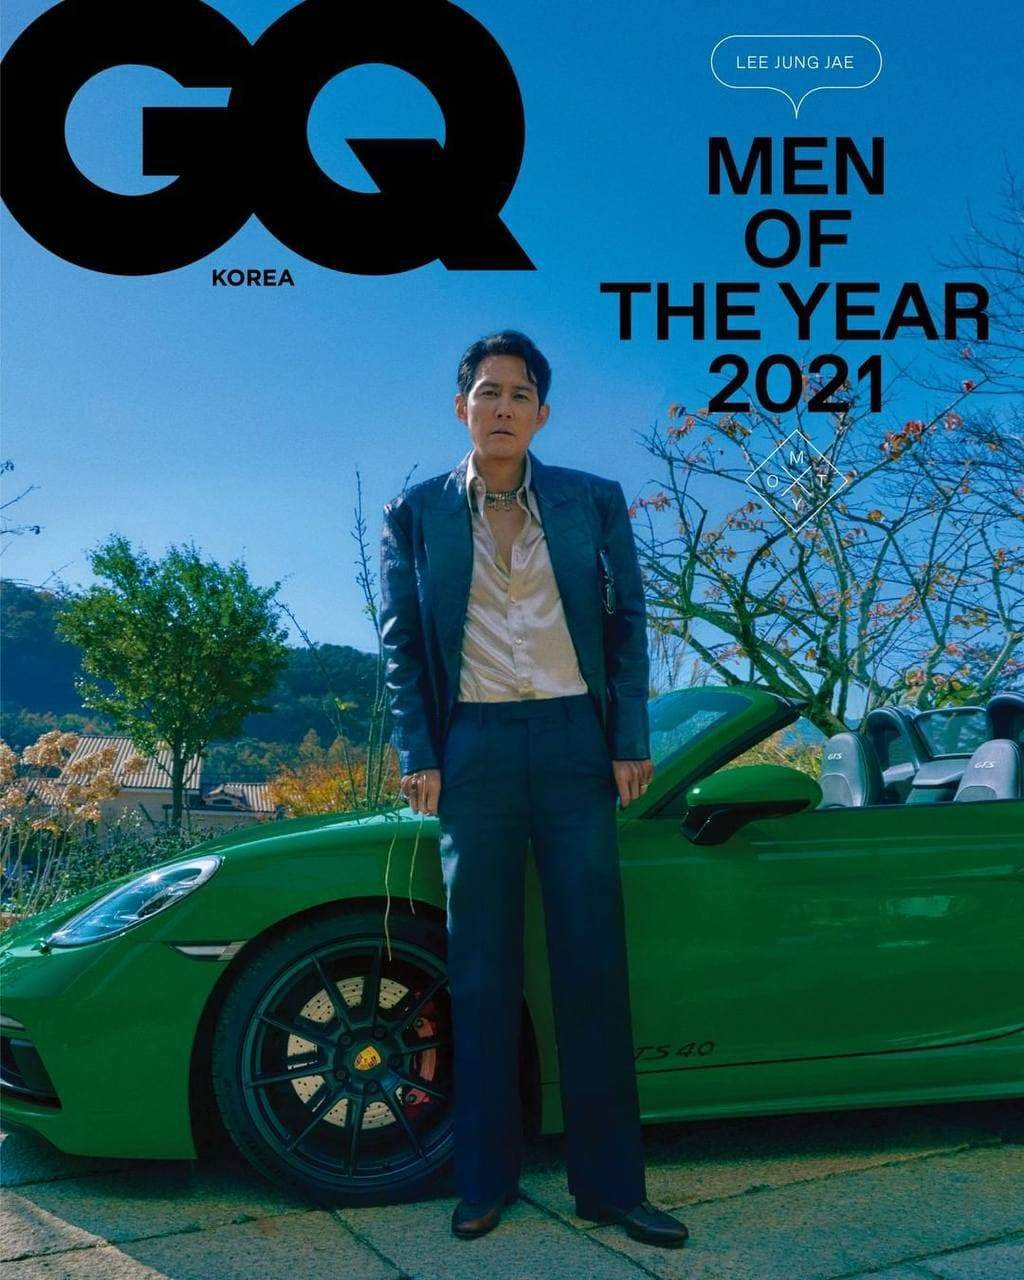 Lee Jong Jae from 'The Squid Game' is GQ's Person of the Year in Korea - Gq, Person, Nomination, Magazine, Movies, Корея, news, People, Career